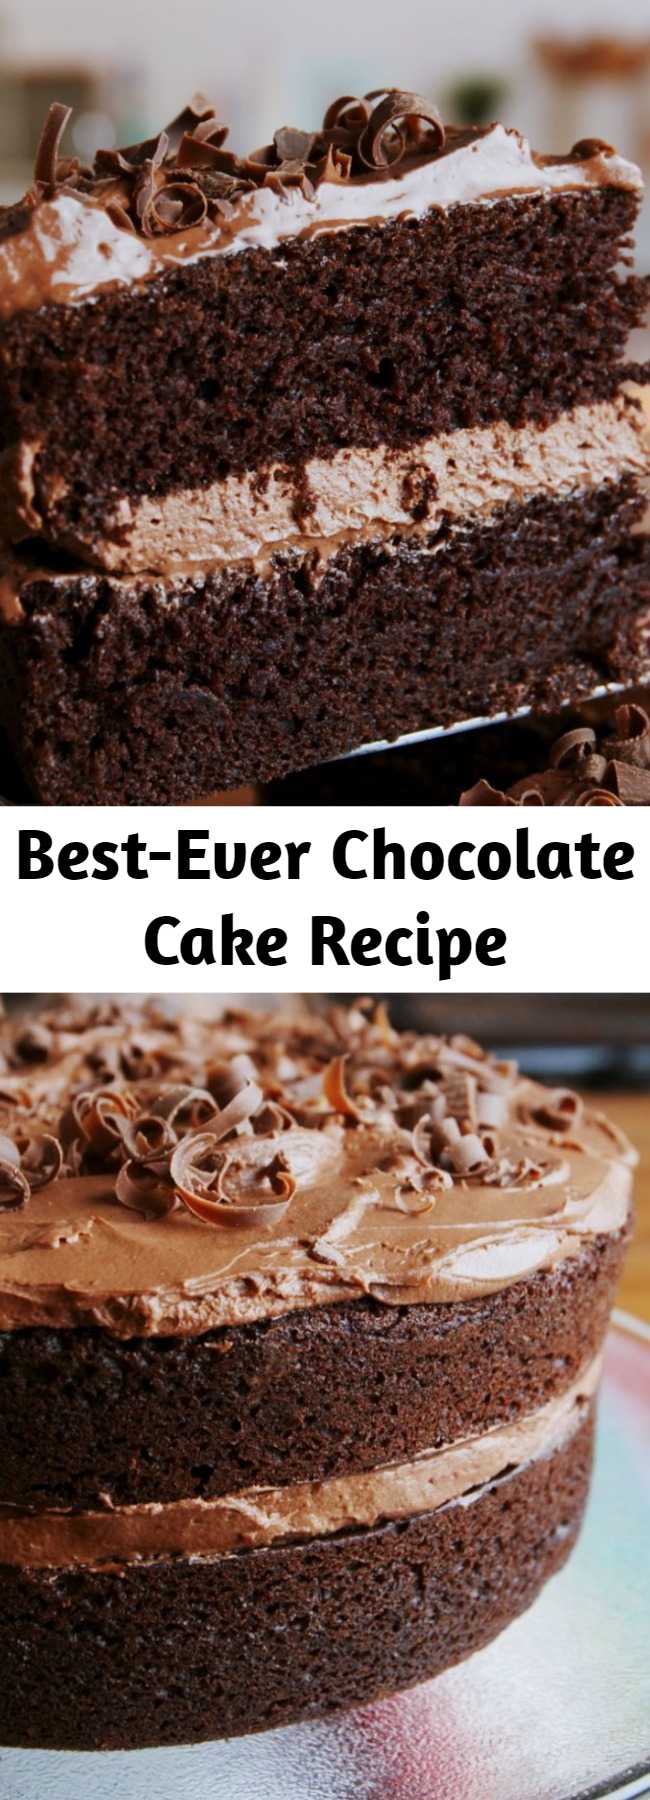 Best-Ever Chocolate Cake Recipe - Ever feel like chocolate cake just isn't... chocolatey enough? Chocolate lovers, meet your new favorite cake. This cake triples down on chocolate flavor with cocoa powder, chocolate chips, and some brewed coffee and espresso powder to bump up that chocolate flavor.